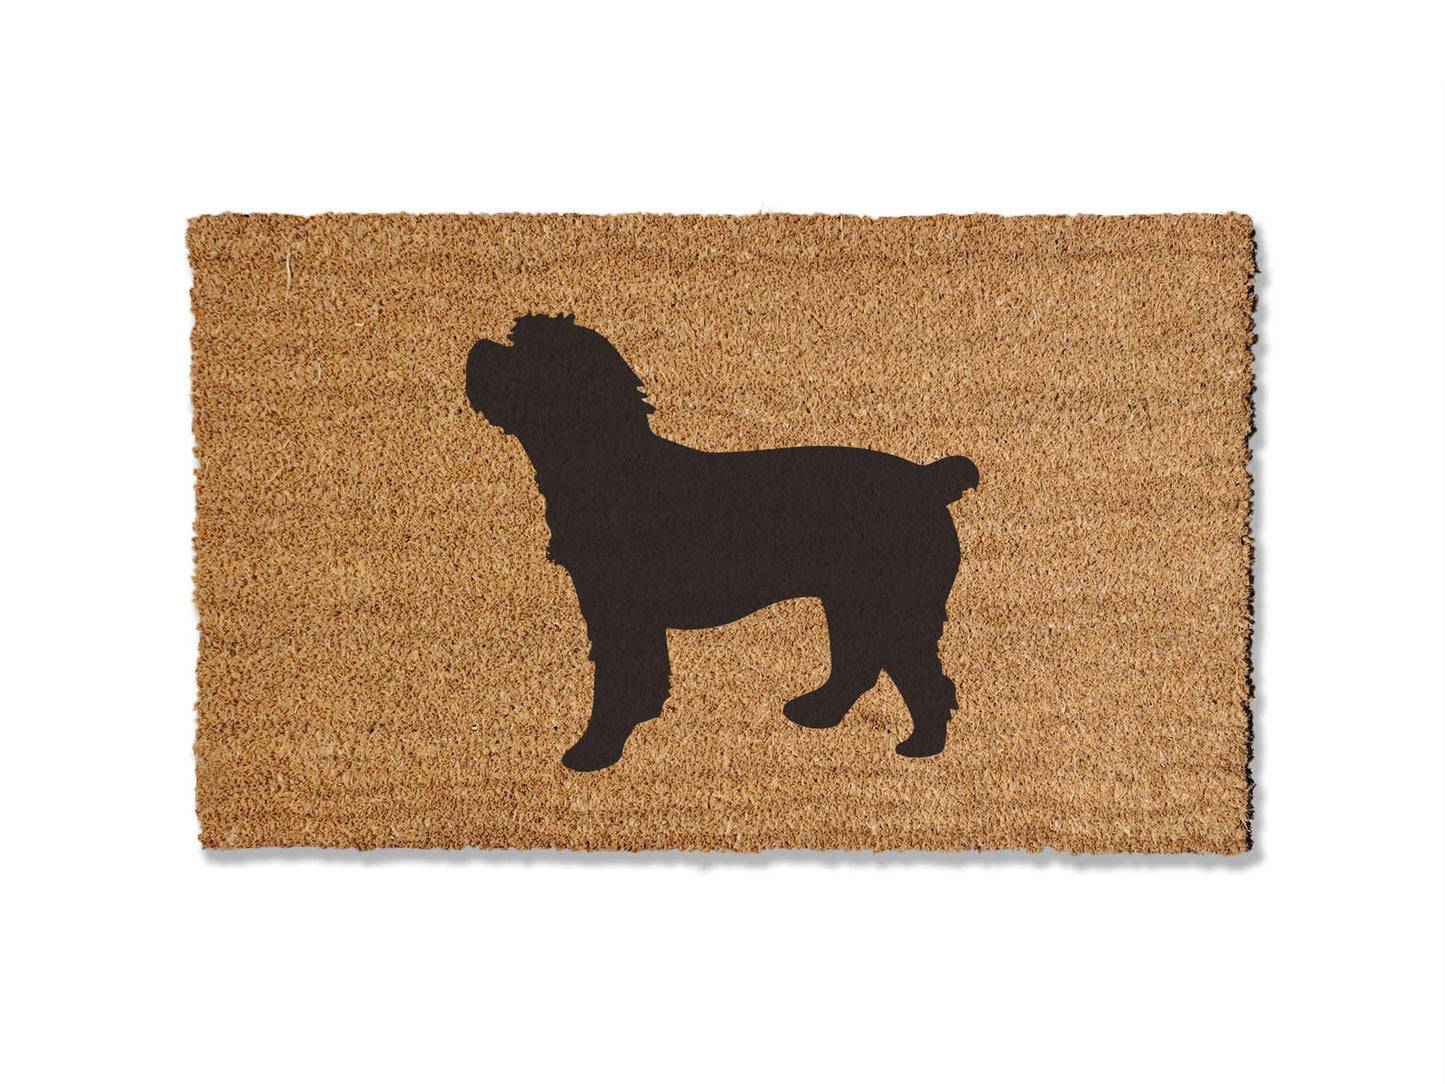 Elevate your entryway with our charming coir welcome doormat featuring an adorable Cockapoo Dog design. Available in multiple sizes, it's the perfect gift for dog lovers, adding a delightful touch to your home's first impression.